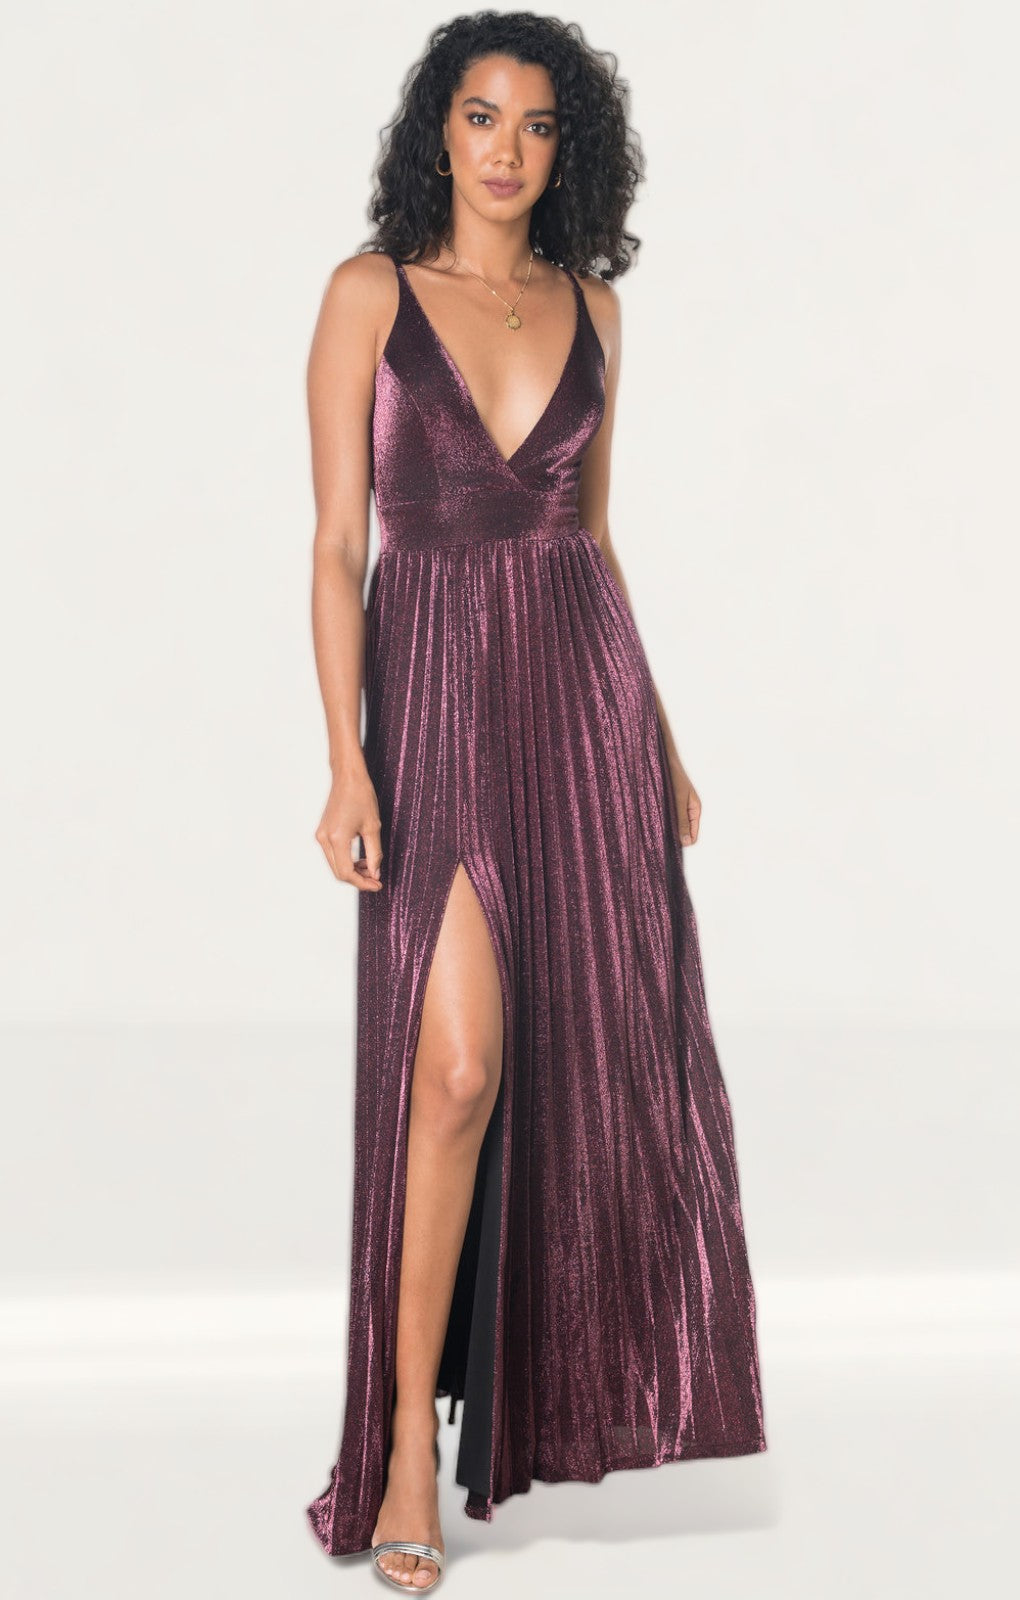 Where to Find Dresses for a Black Tie Wedding